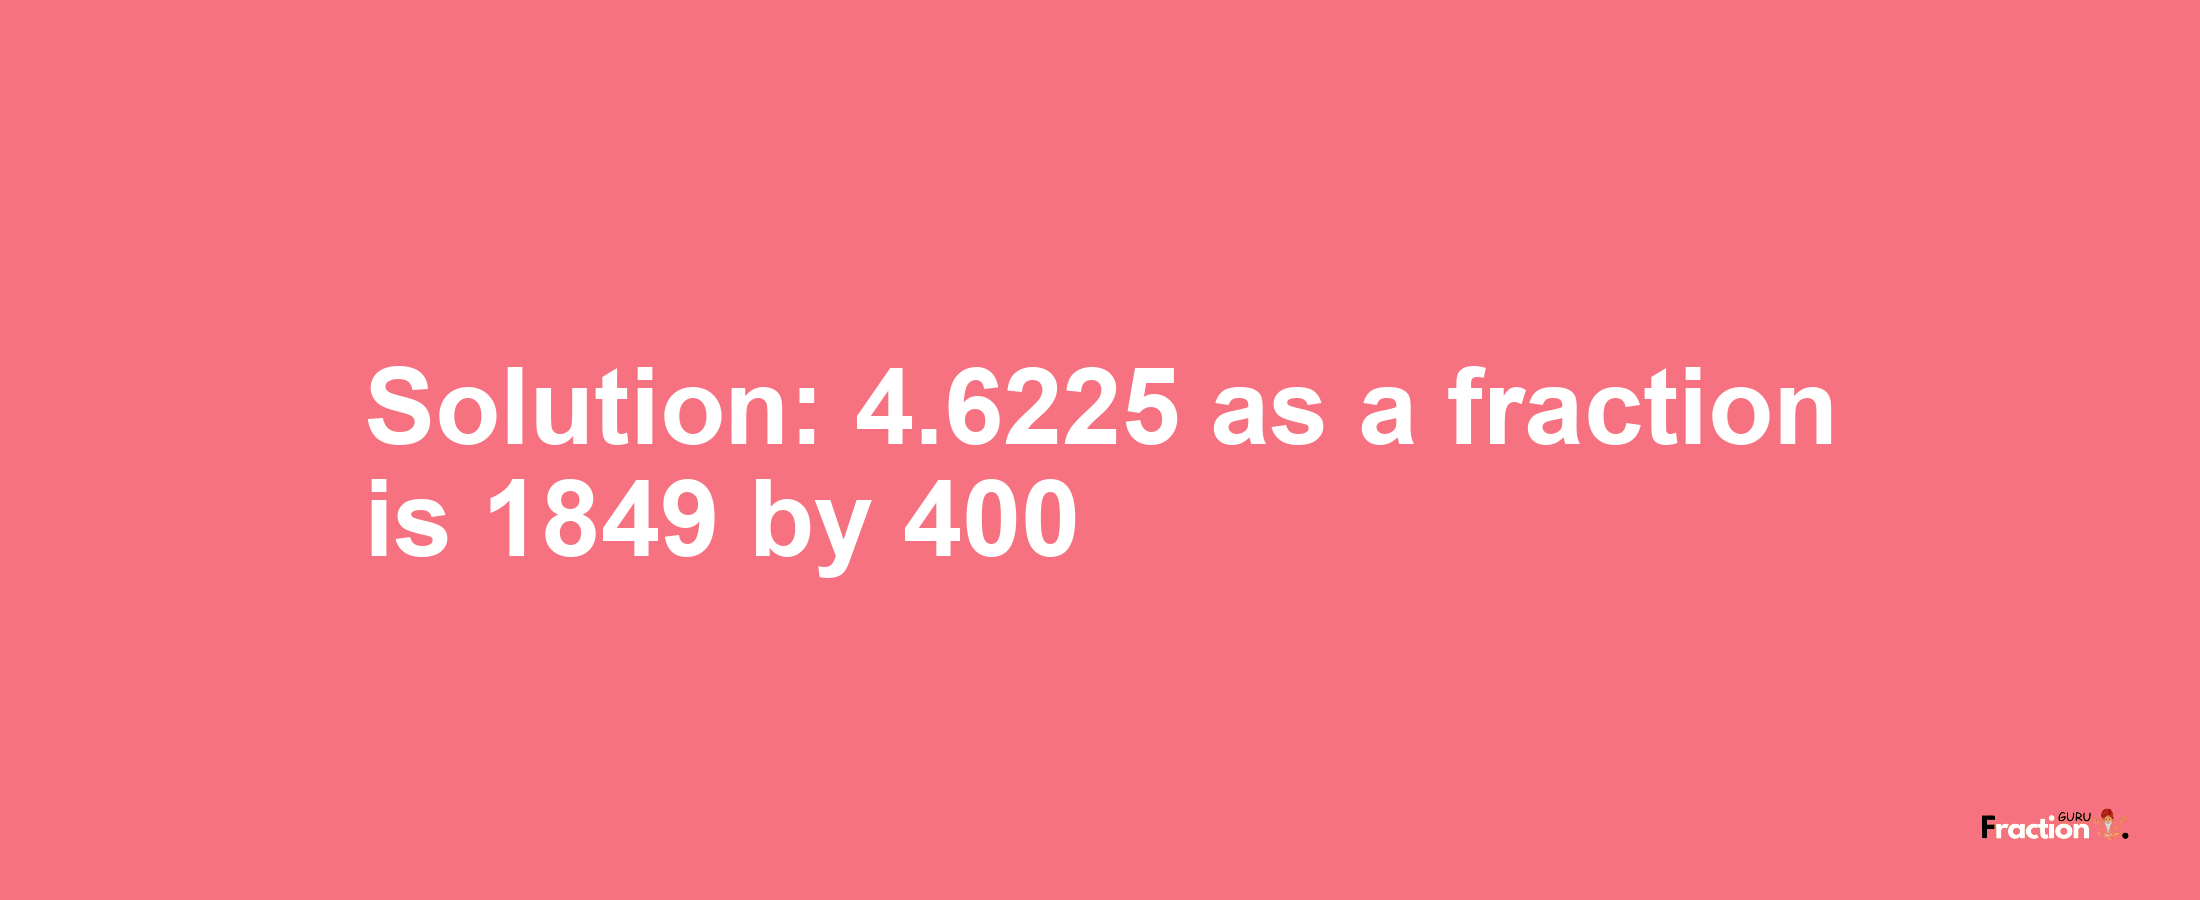 Solution:4.6225 as a fraction is 1849/400